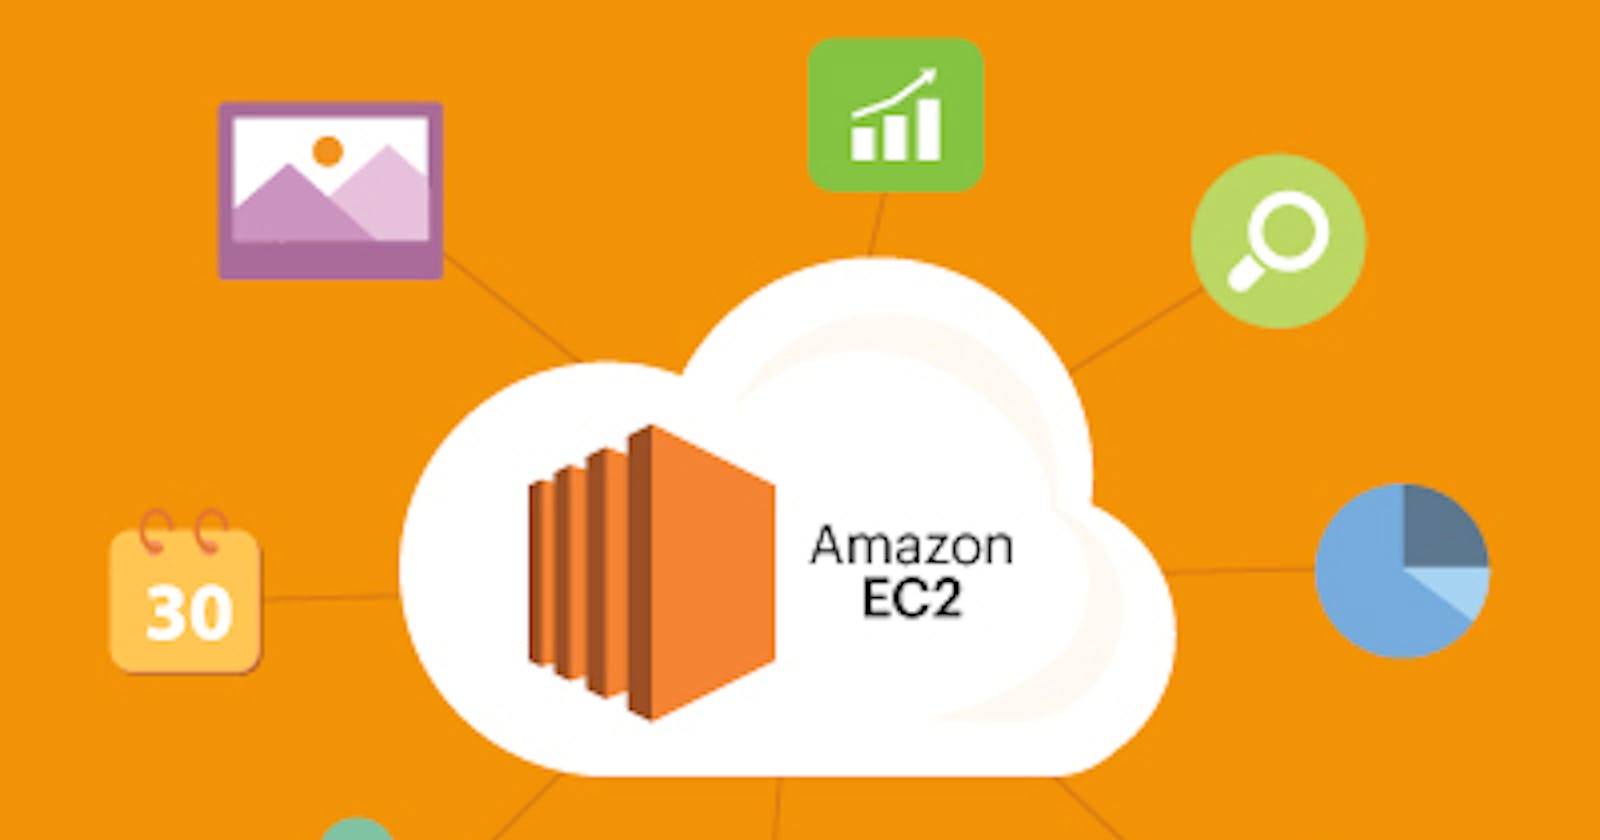 Day 40 AWS EC2 Automation ☁